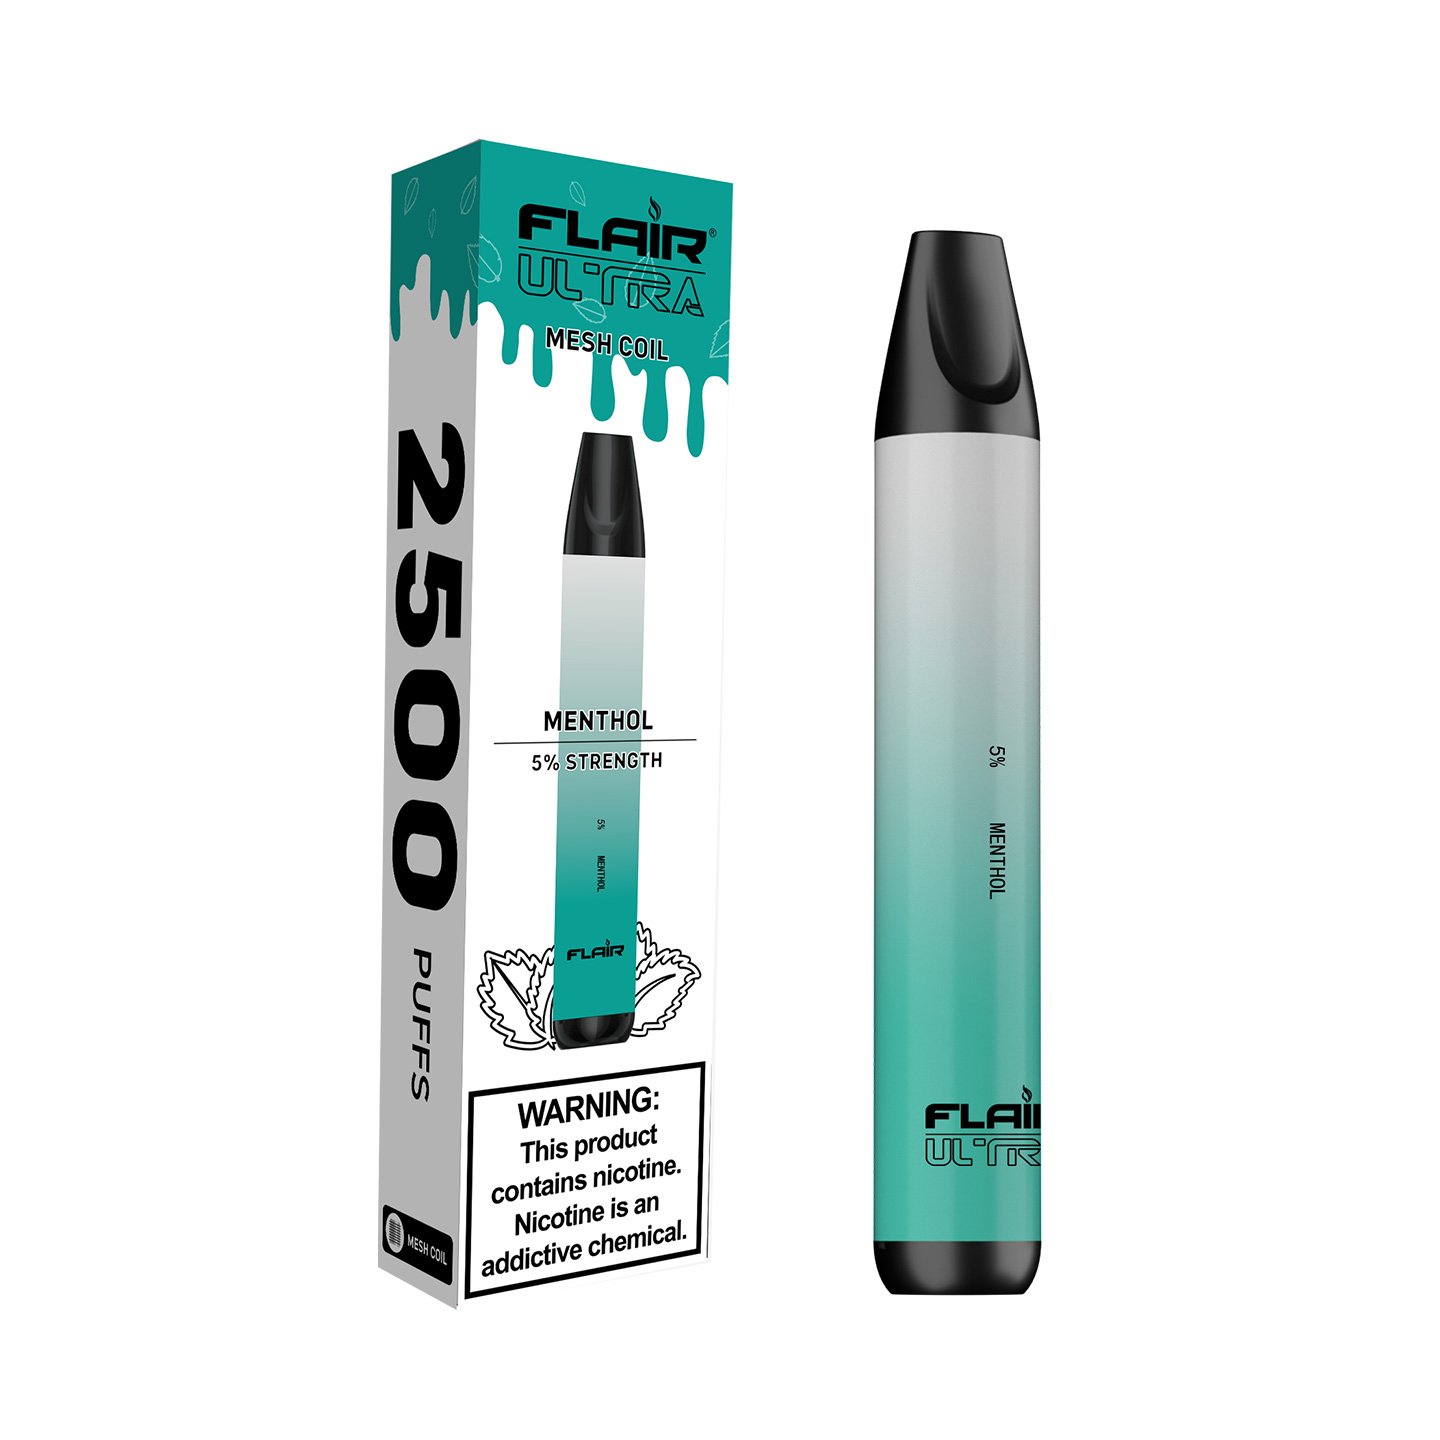 Flair Ultra Disposable Devices (Menthol - 2500 Puffs)